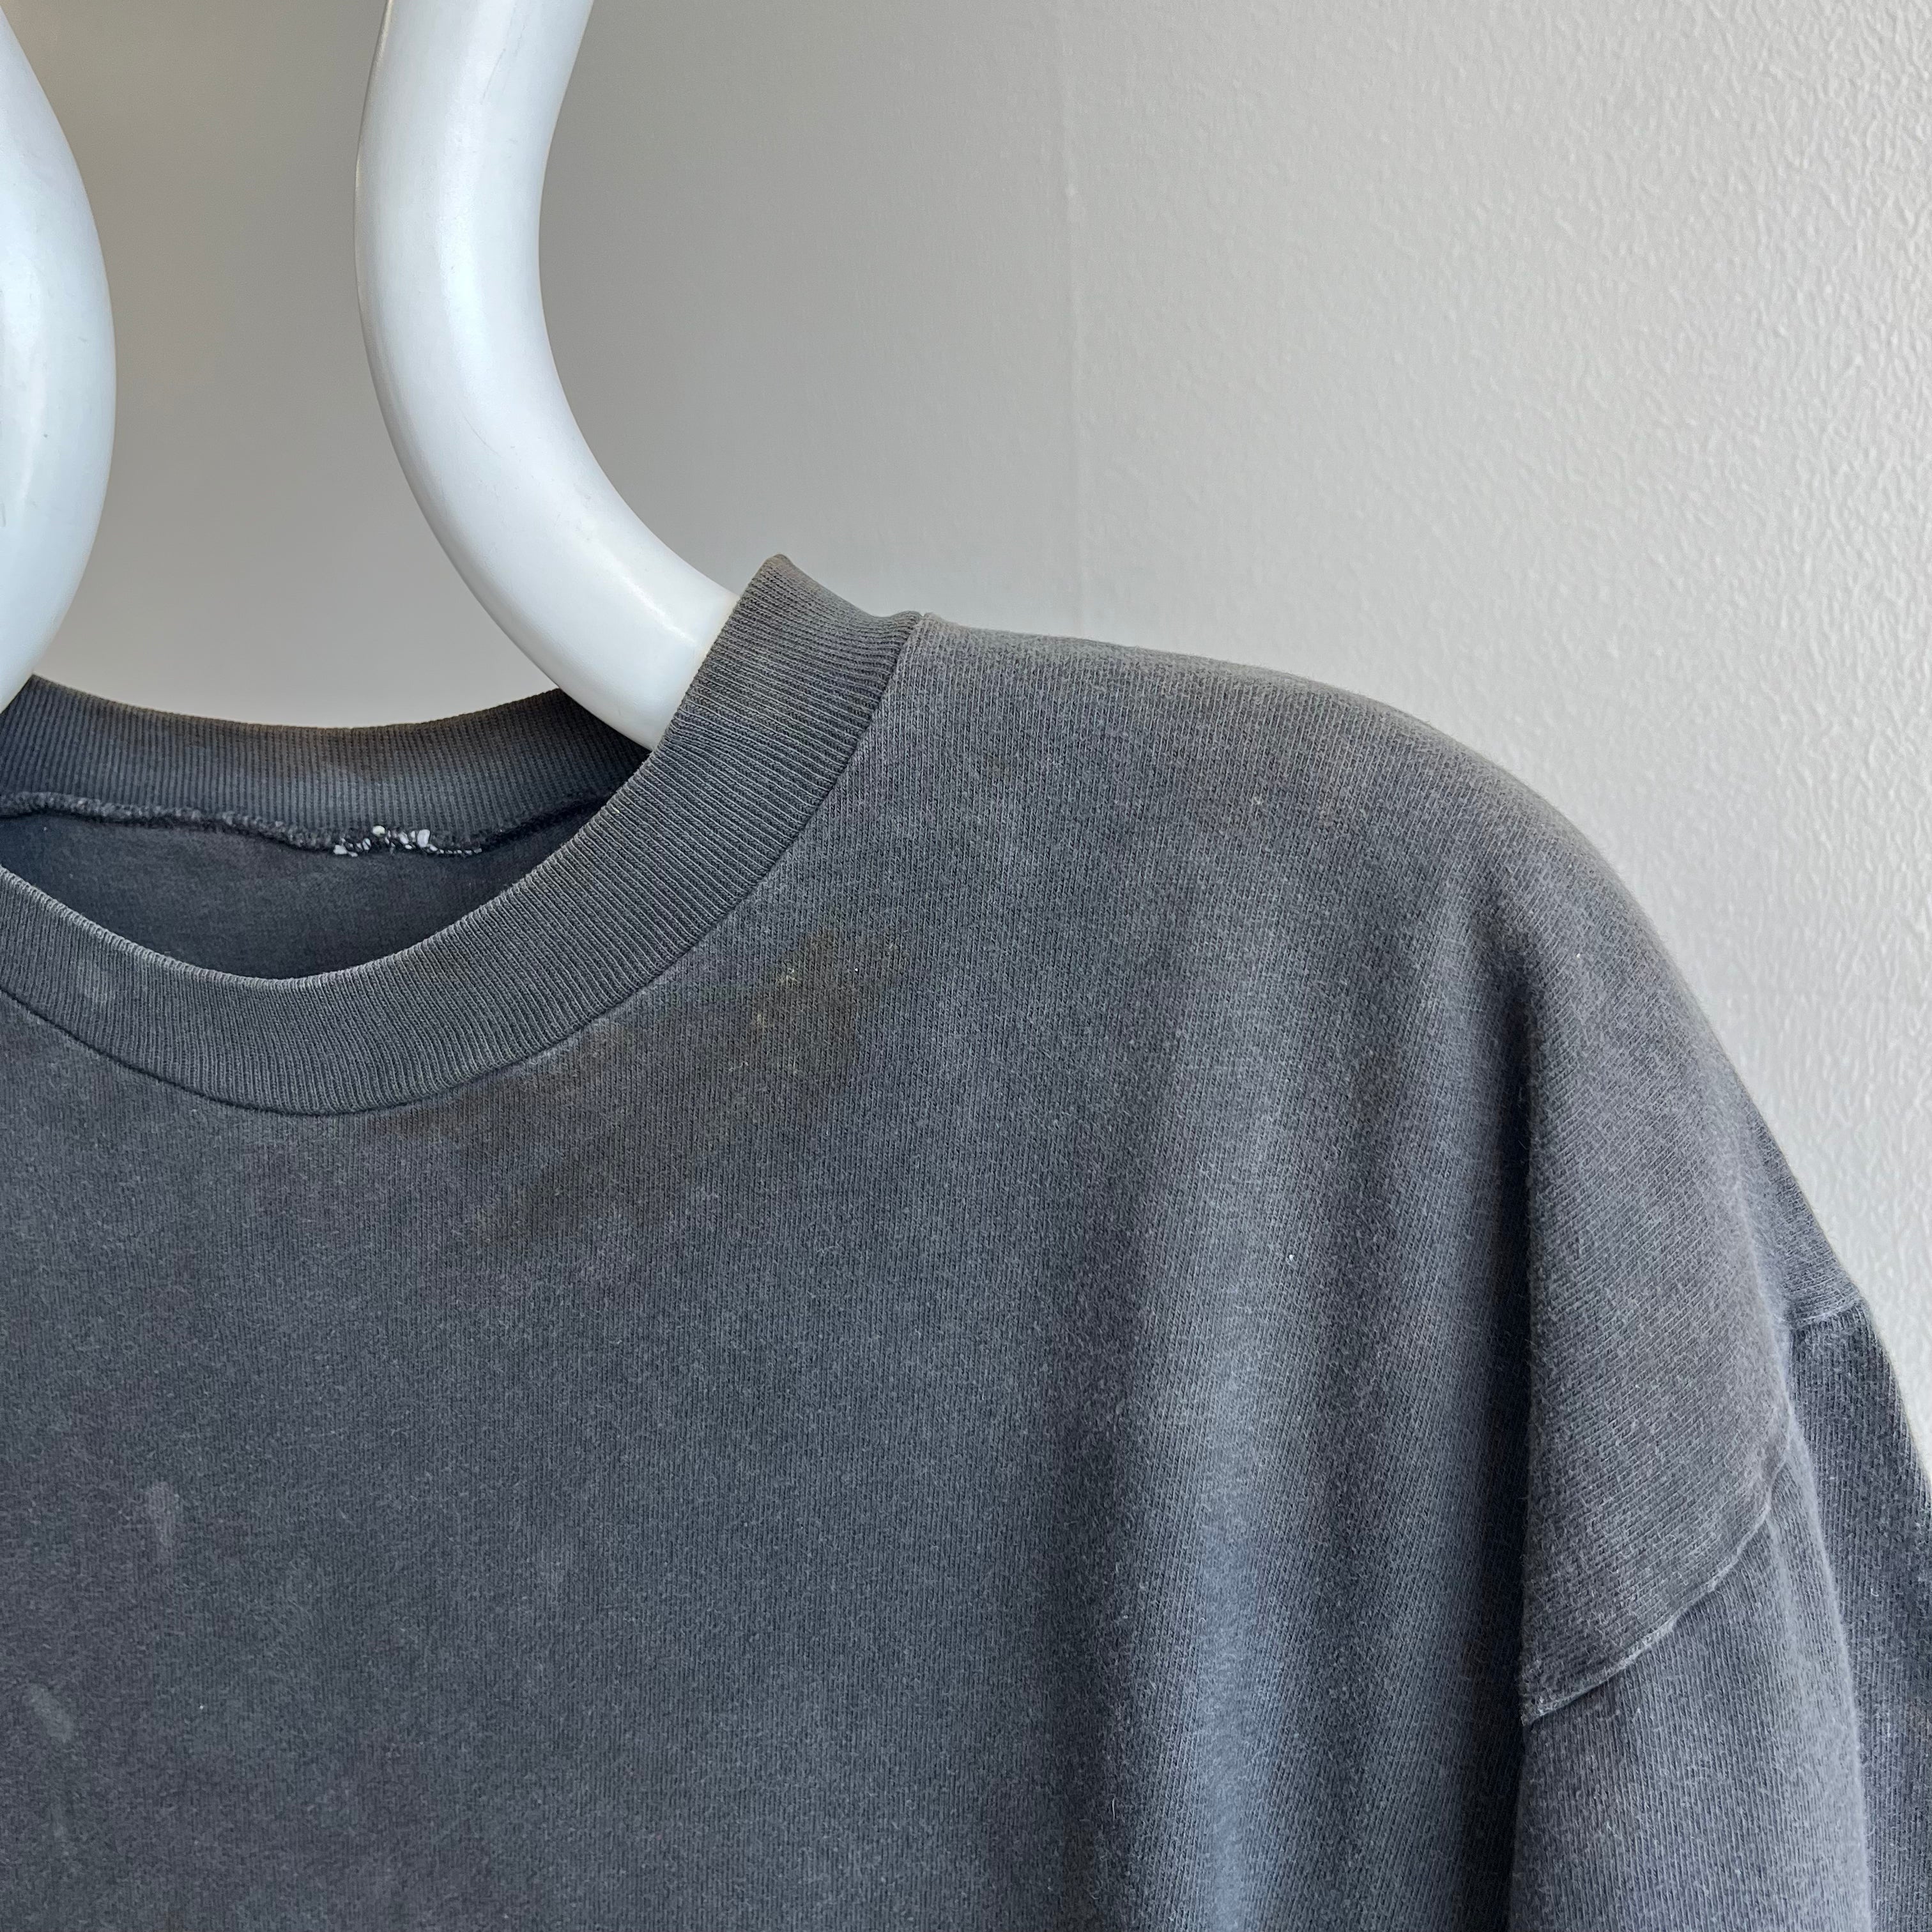 1990s Super Age Stained and Faded Blank Black Boxy Cotton T-Shirt